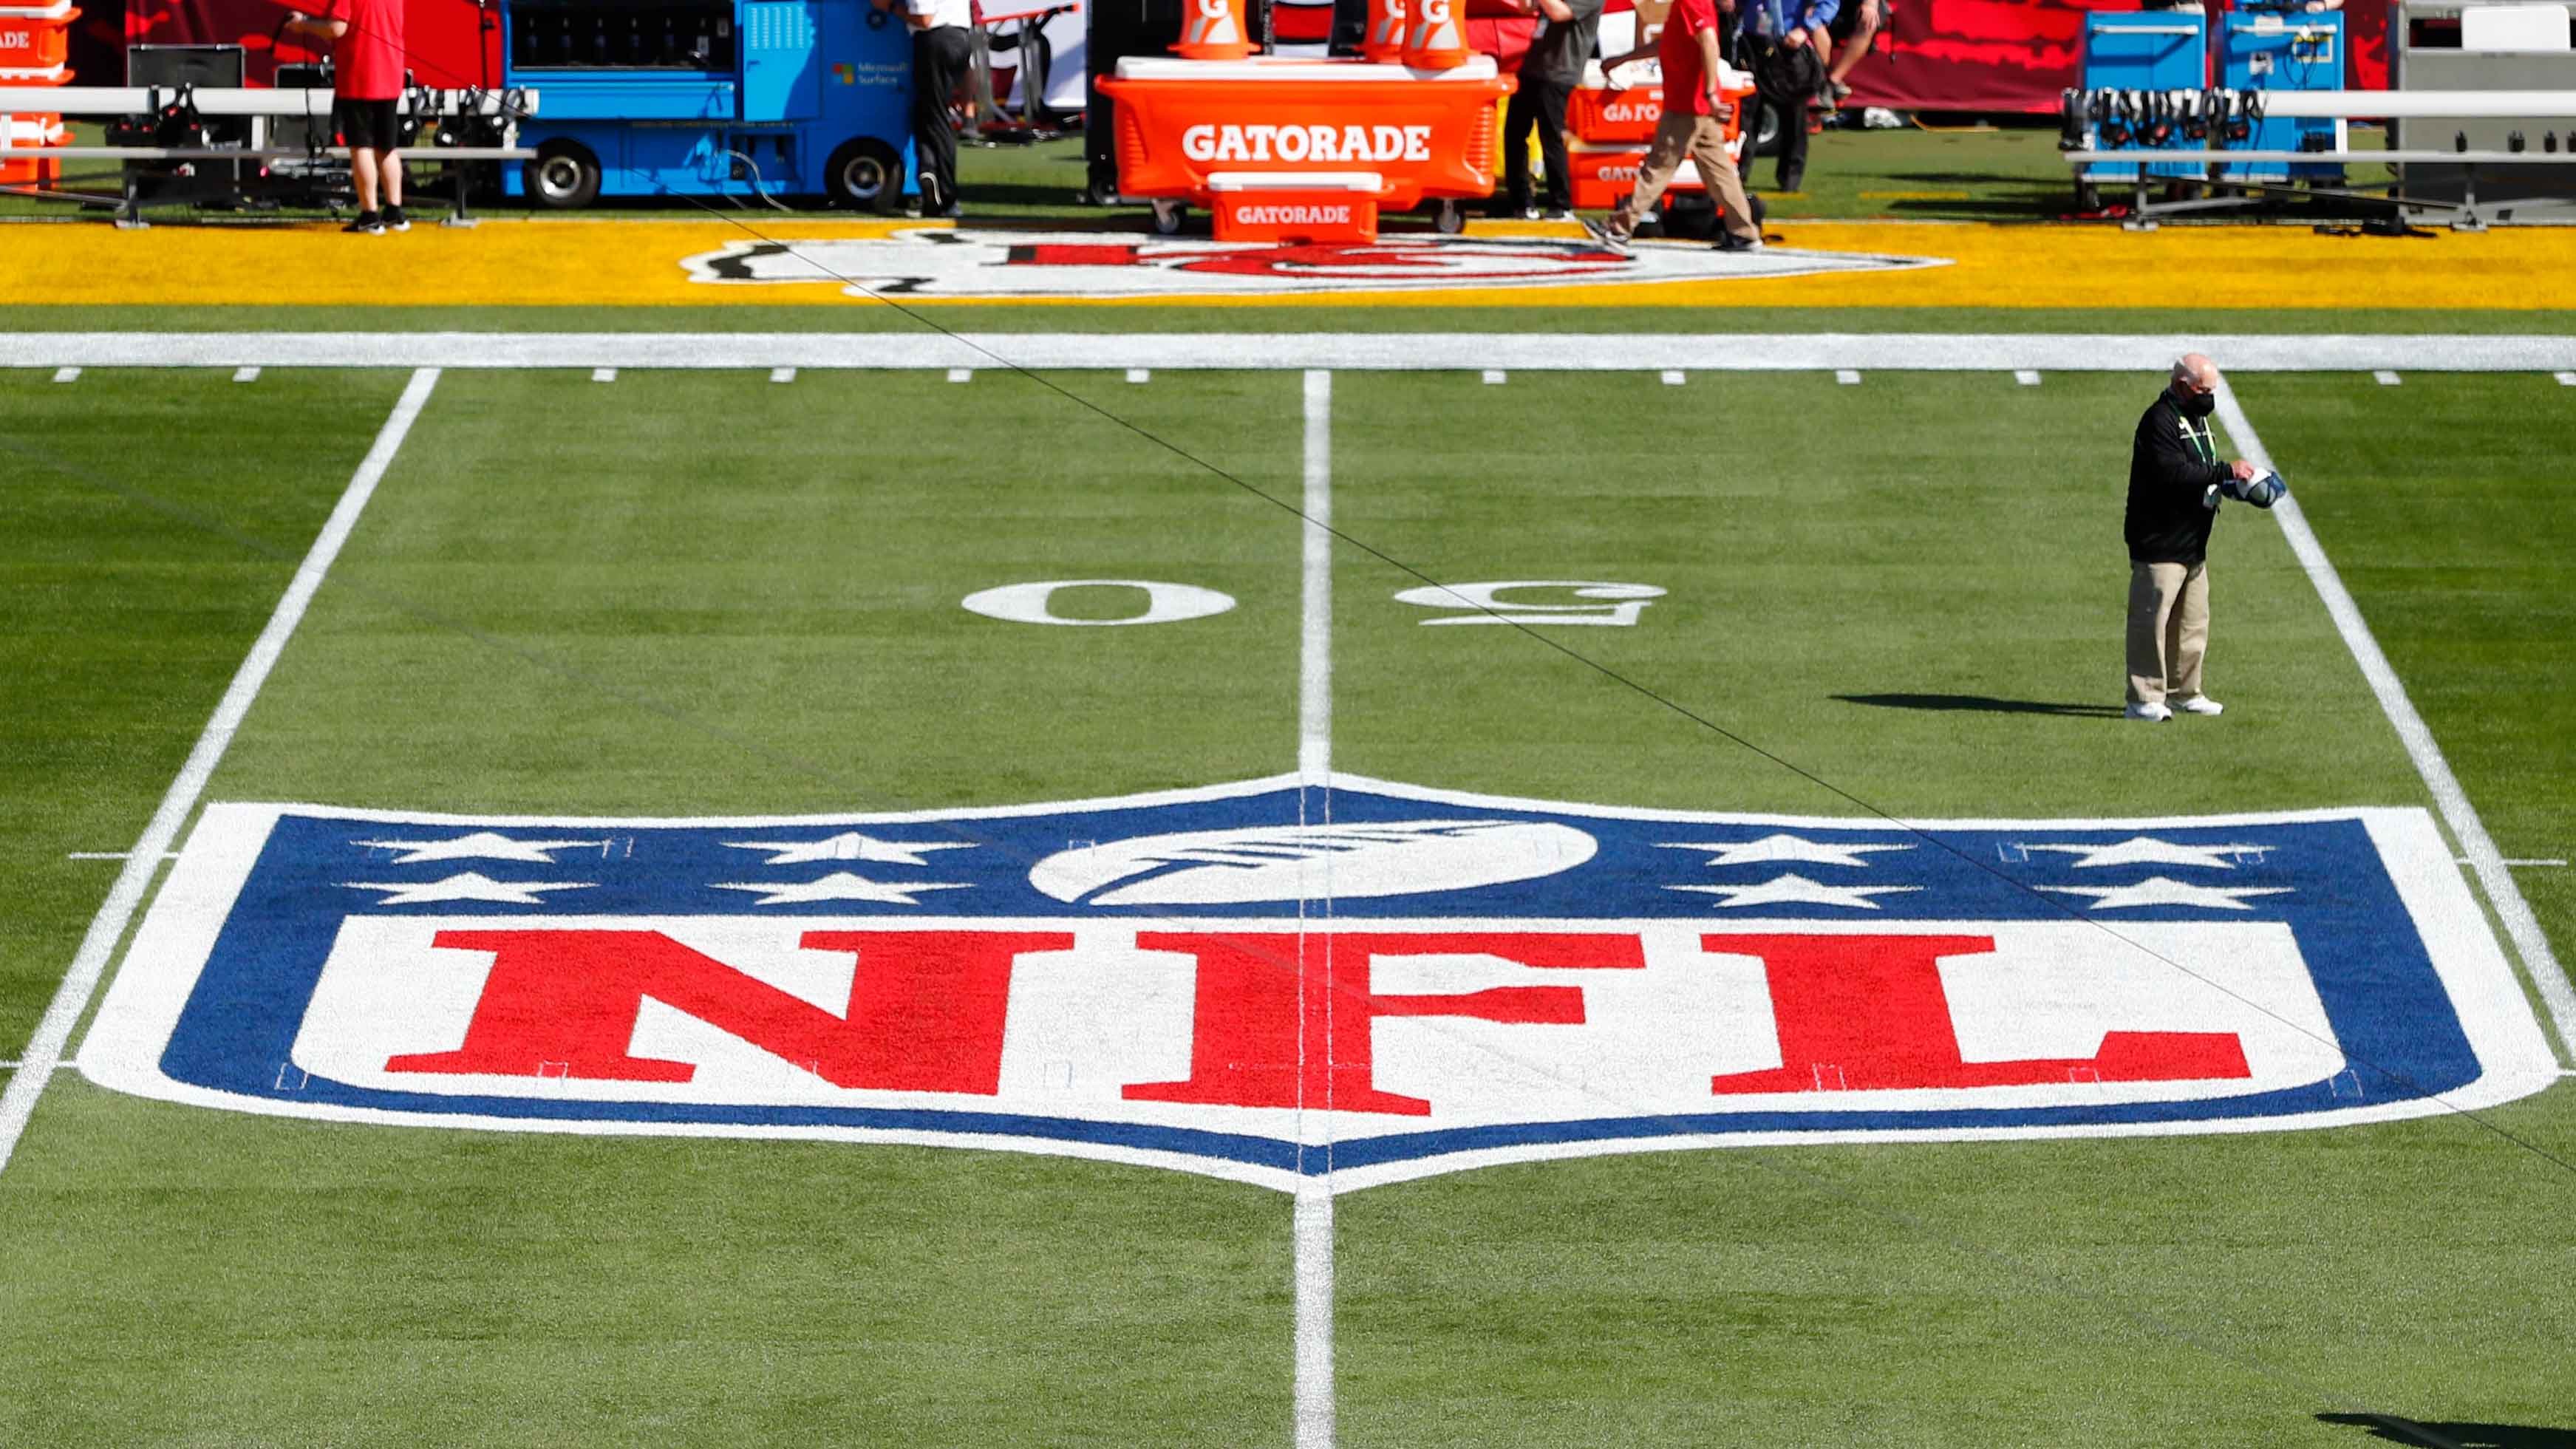 2022 NFL Schedule: How many games will each NFL team play?